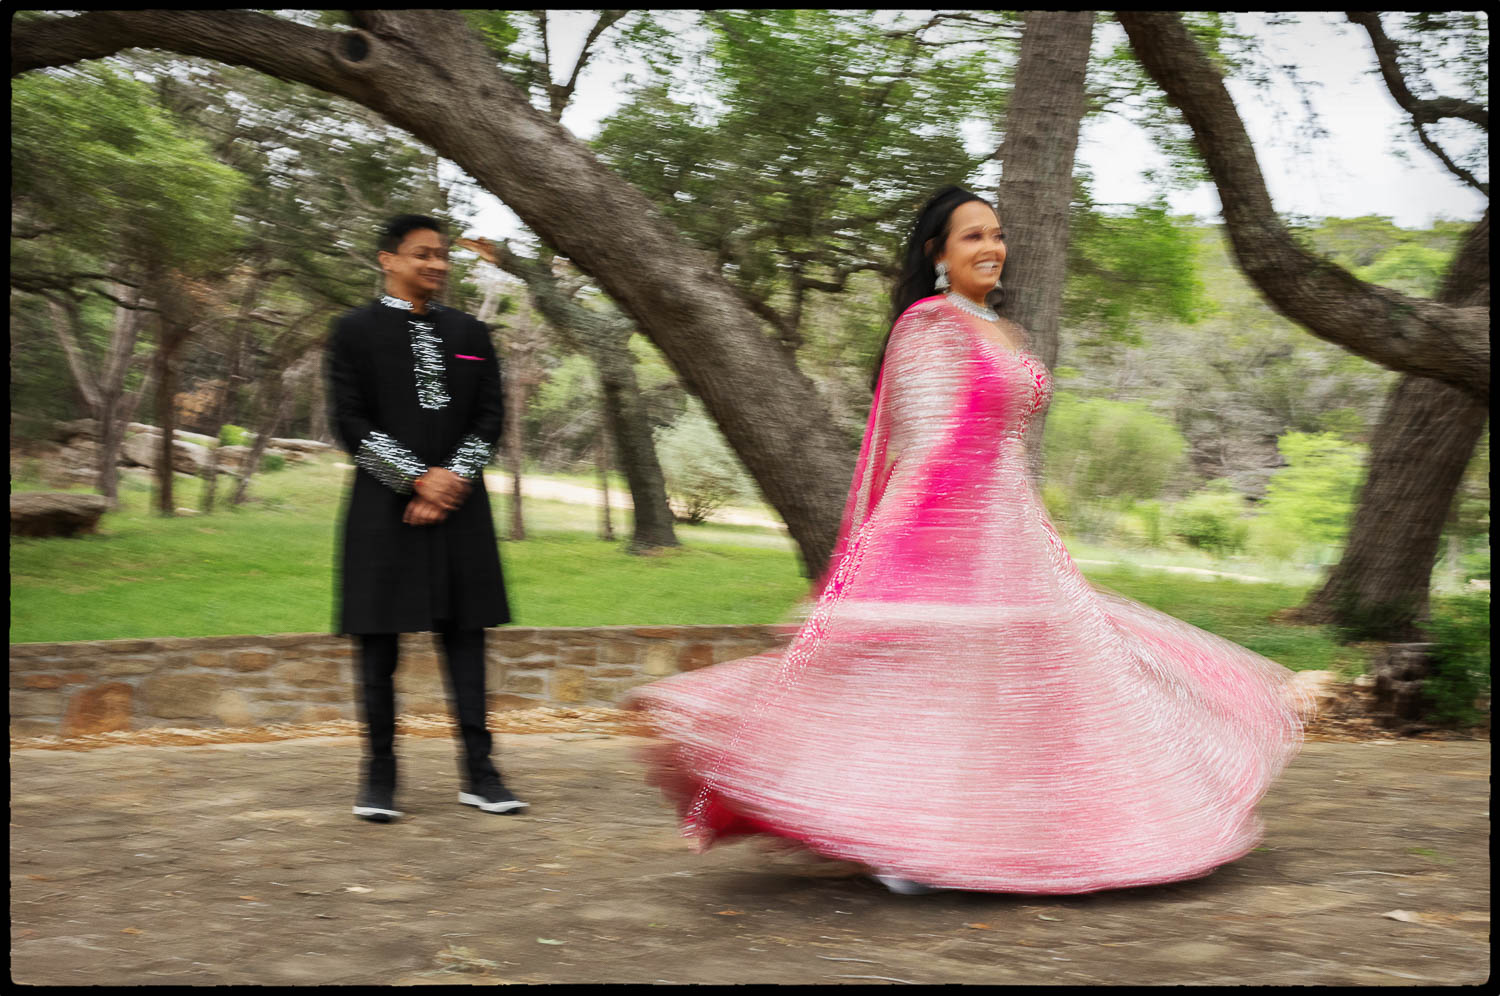 a woman in a pink dress and a man in a black suit shows motion as she swirls her dress